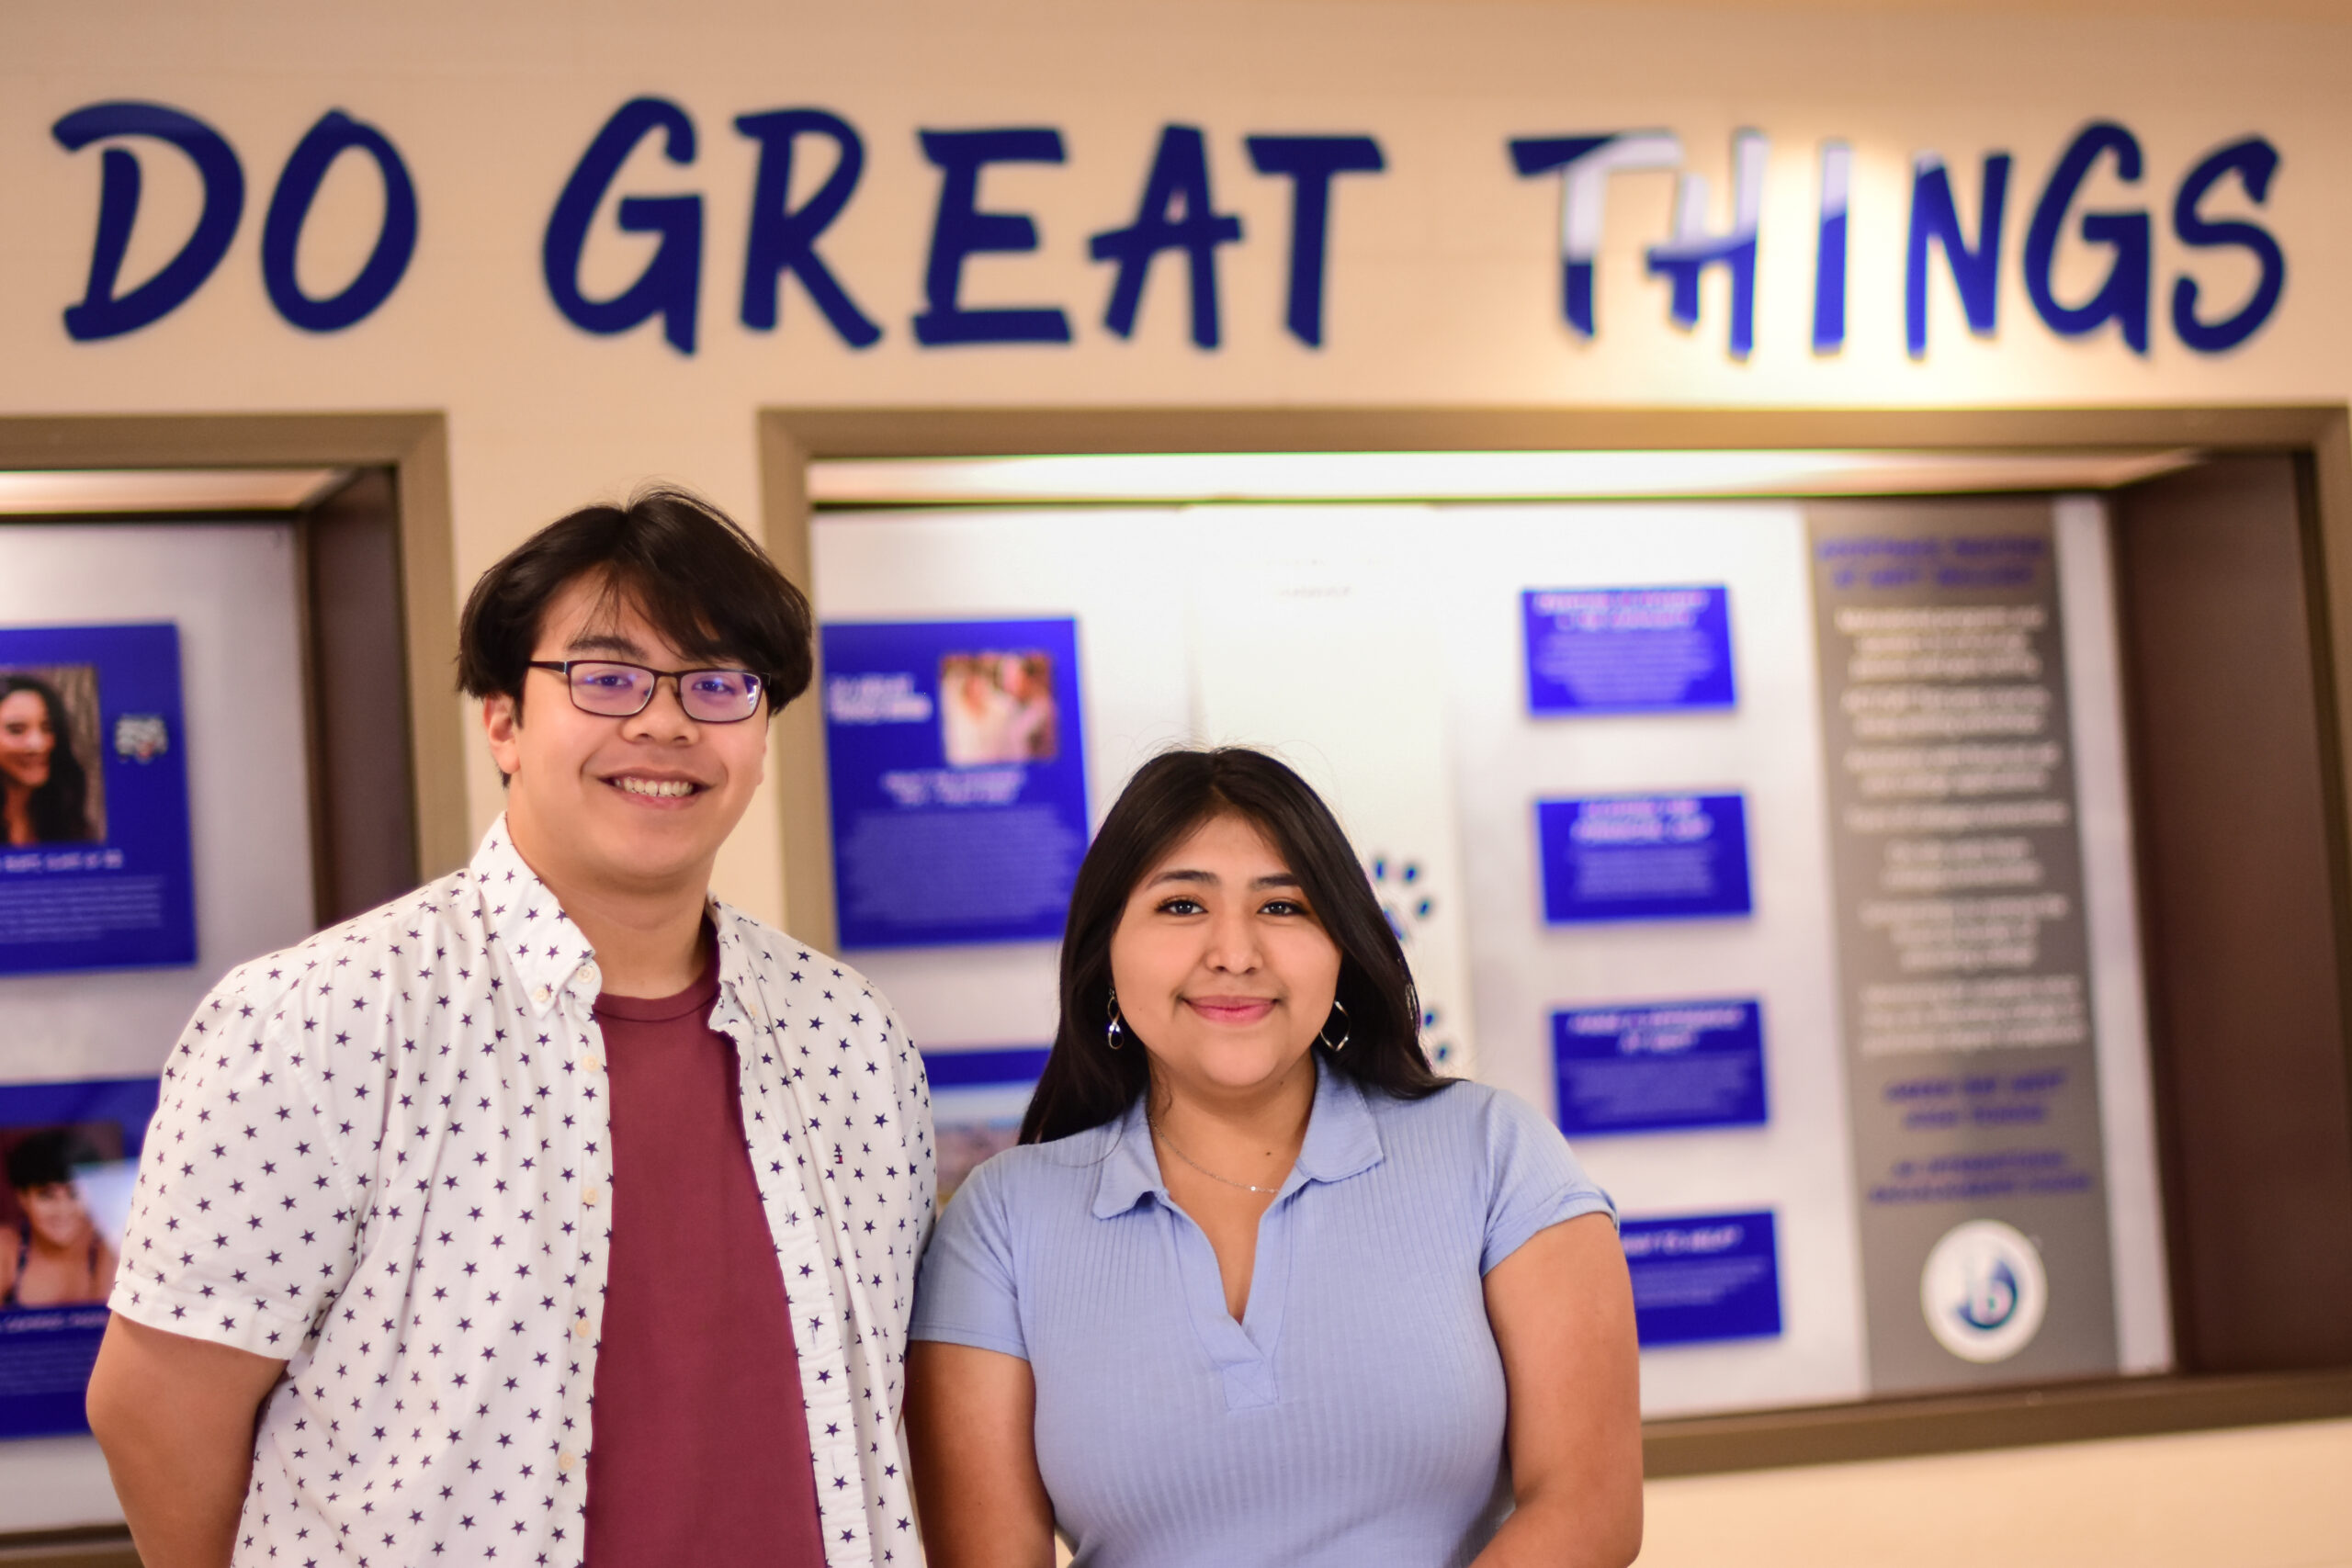 Derek Thepphone and Giselle Morelos Balbuena at Do Great Things Display.